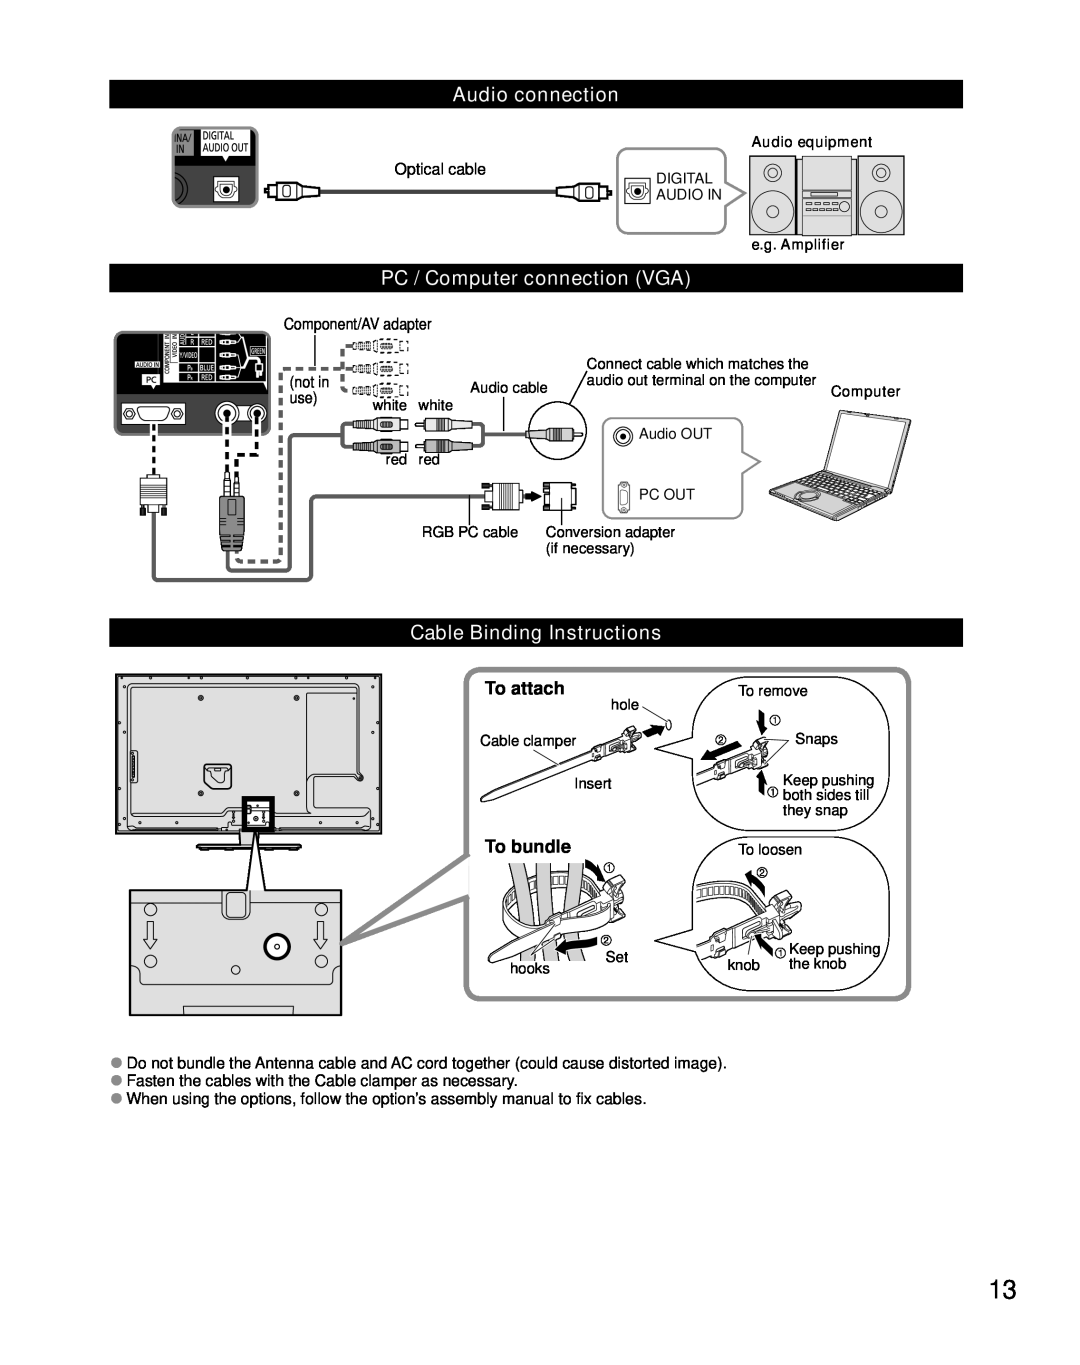 Panasonic TCL42E50 Audio connection, PC / Computer connection VGA, Cable Binding Instructions, To attach, To bundle 